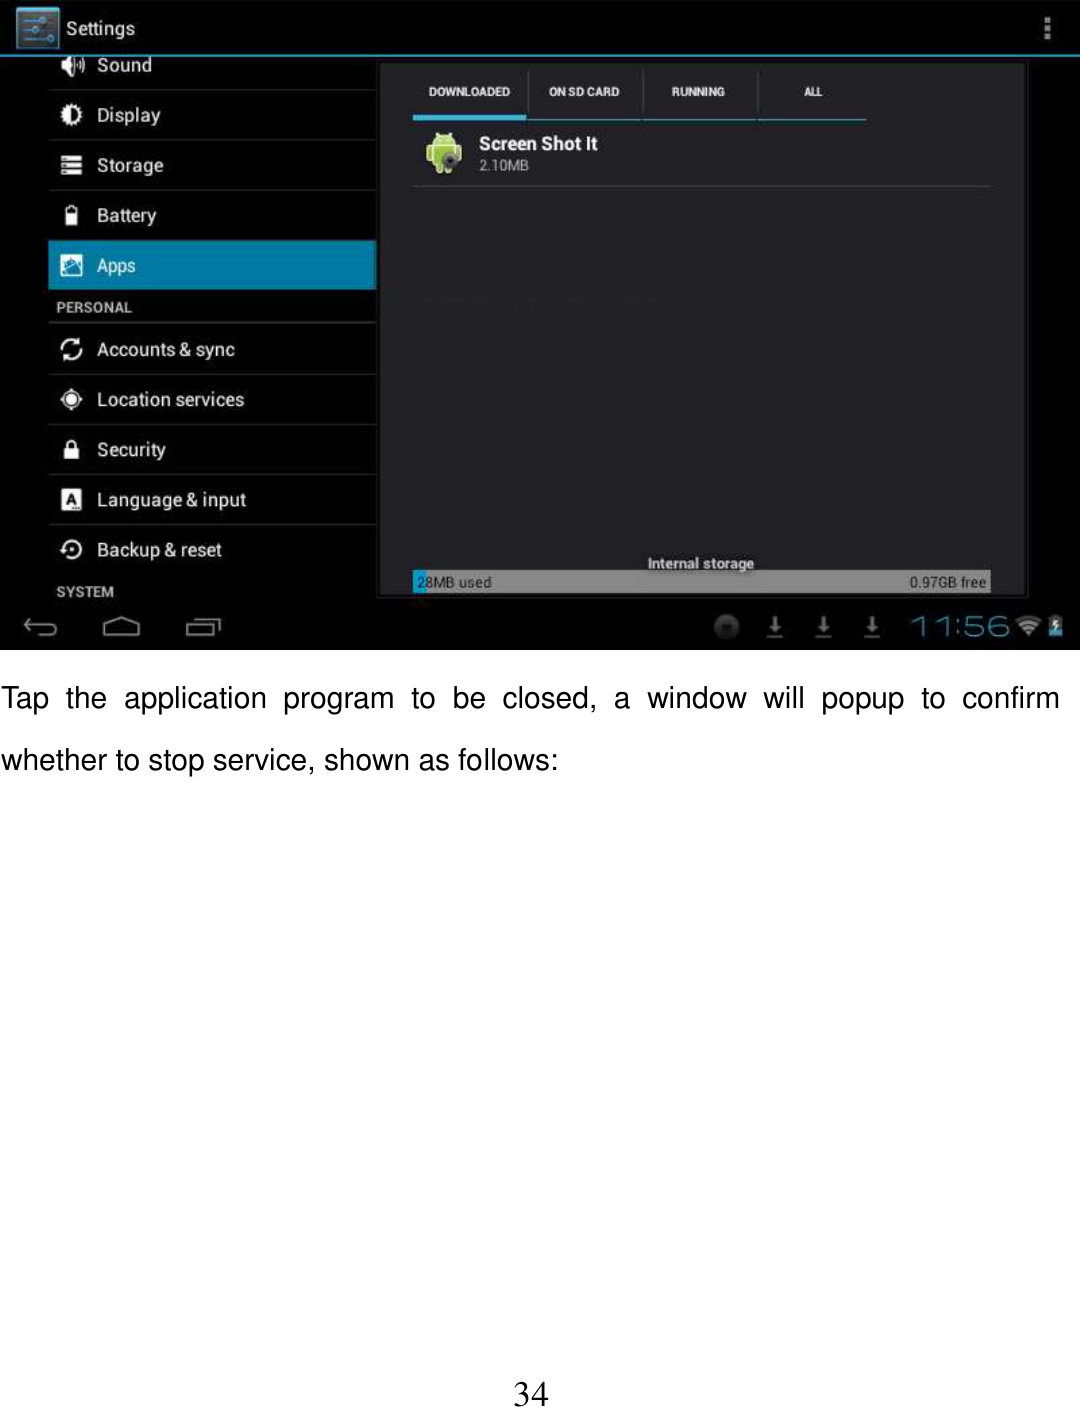   34  Tap  the  application  program  to  be  closed,  a  window  will  popup  to  confirm whether to stop service, shown as follows: 